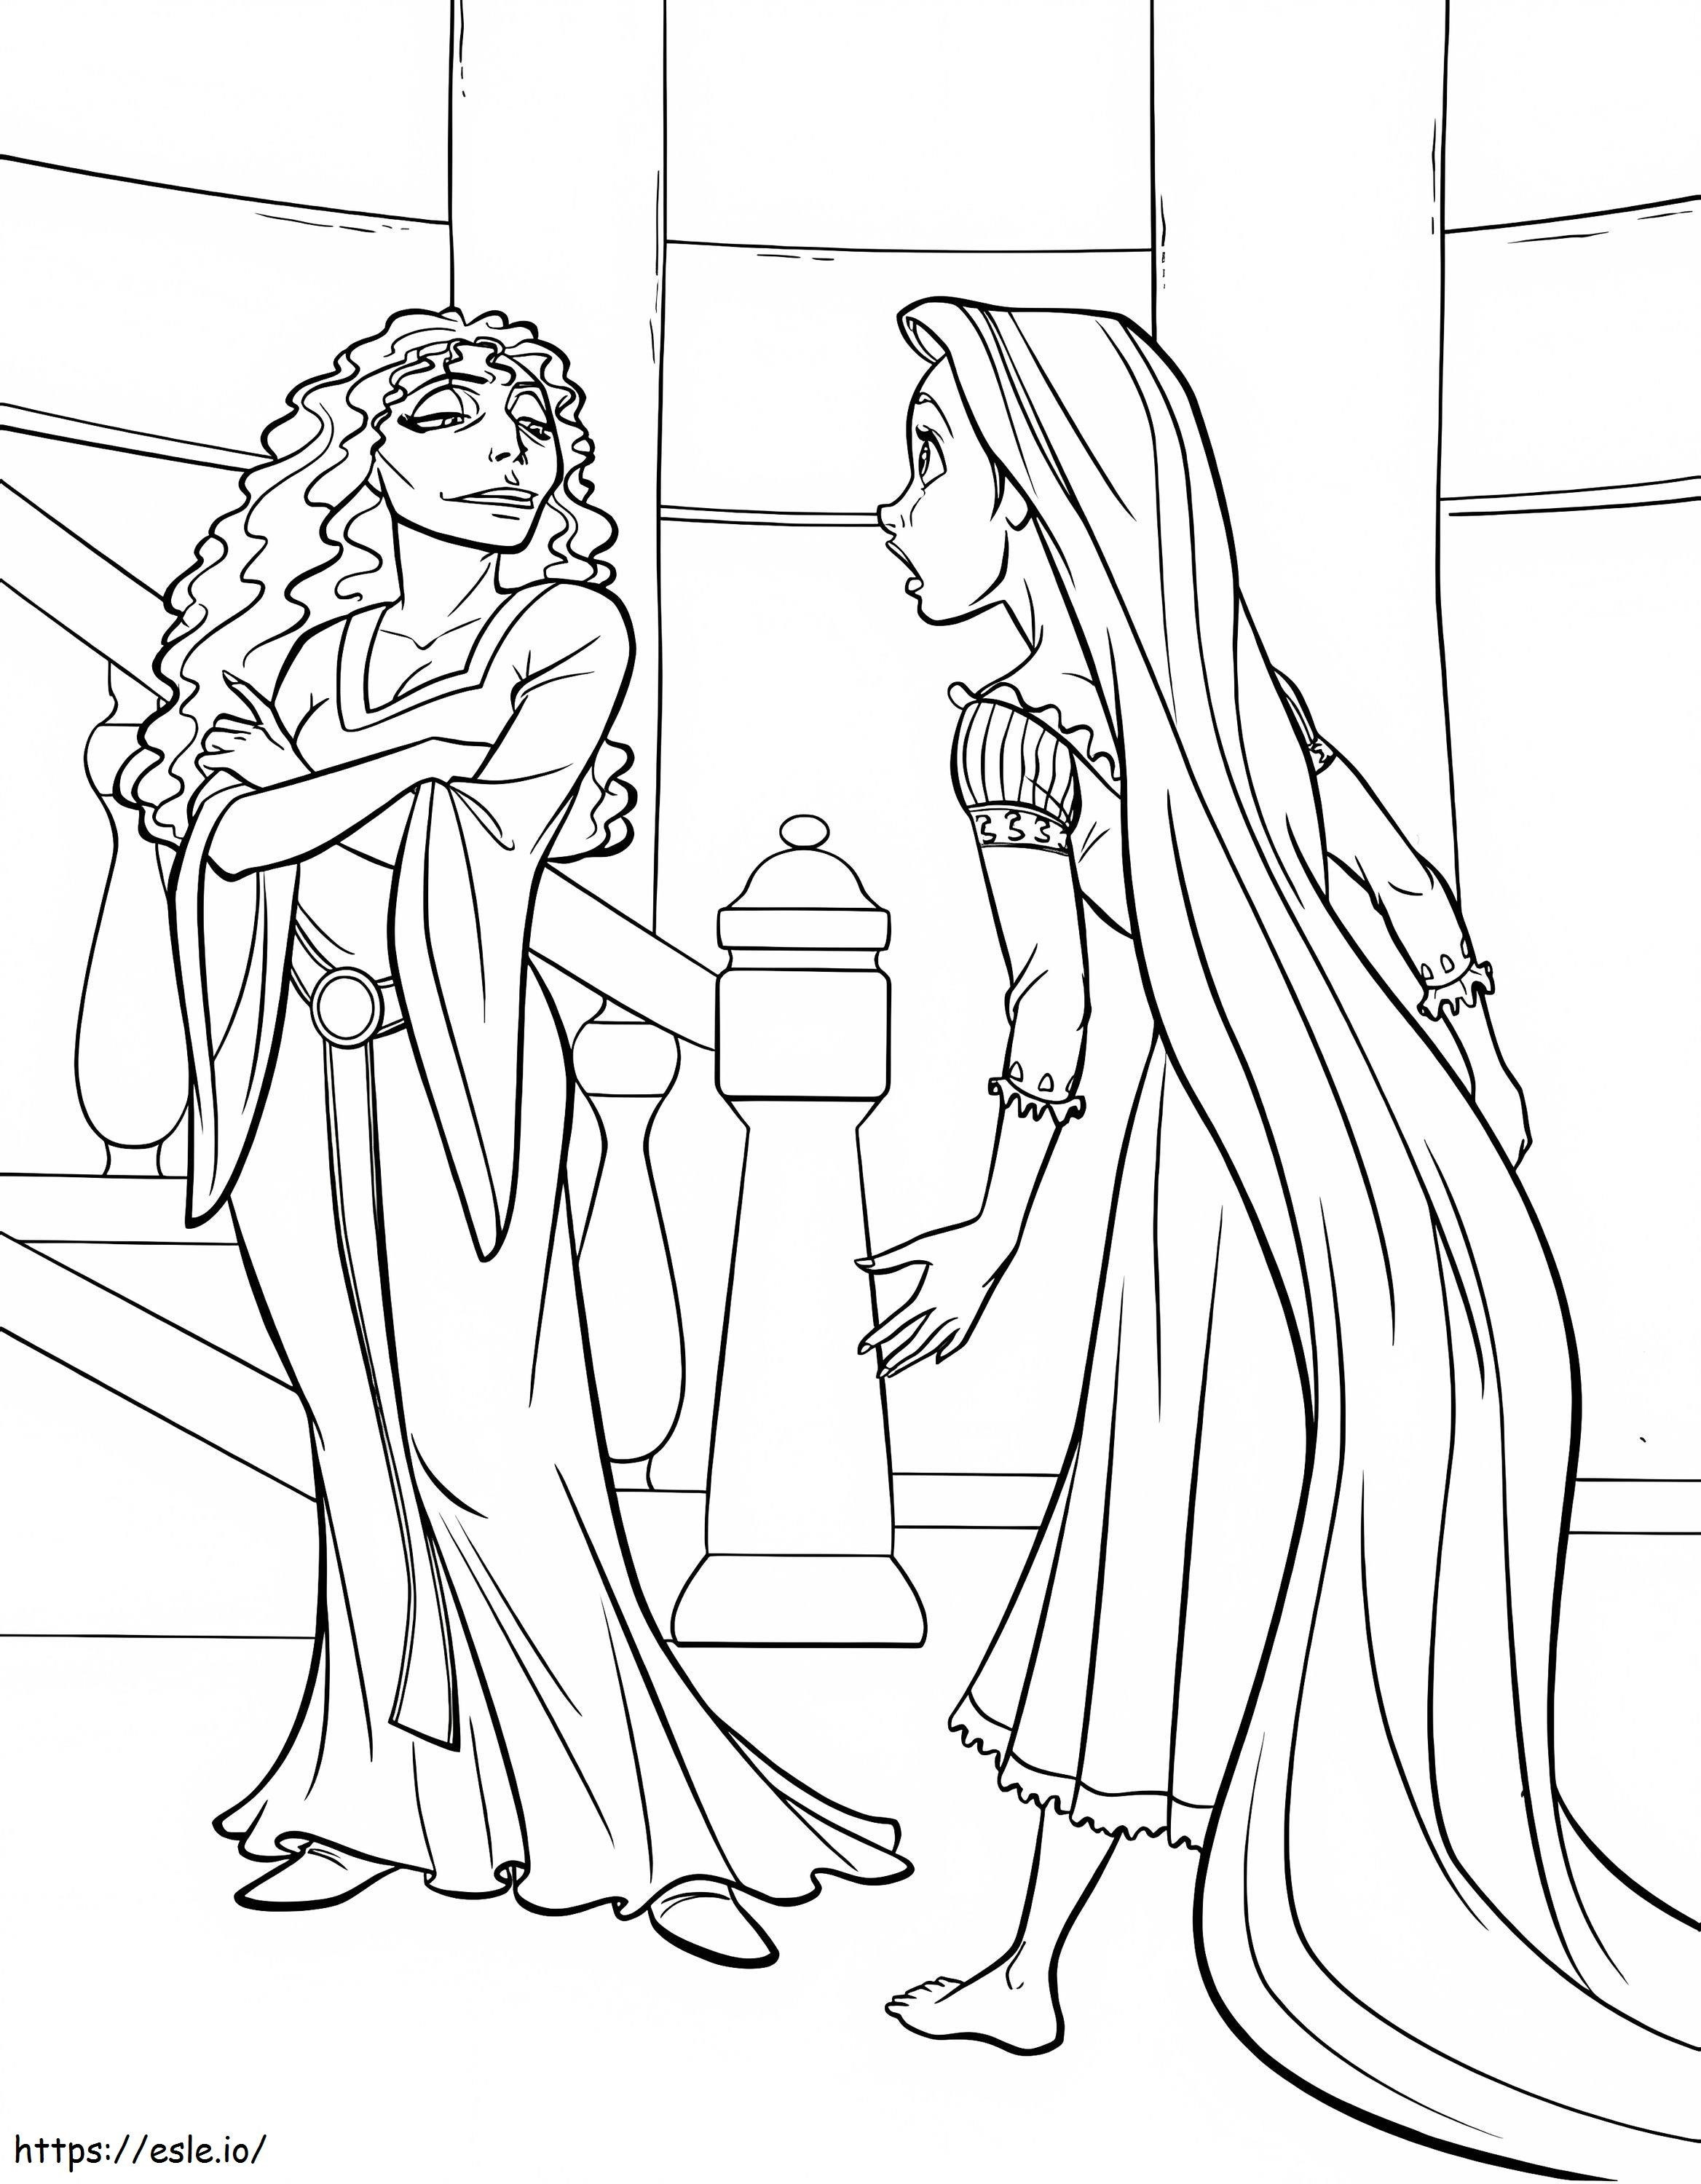 Rapunzel And Mother Gothel coloring page